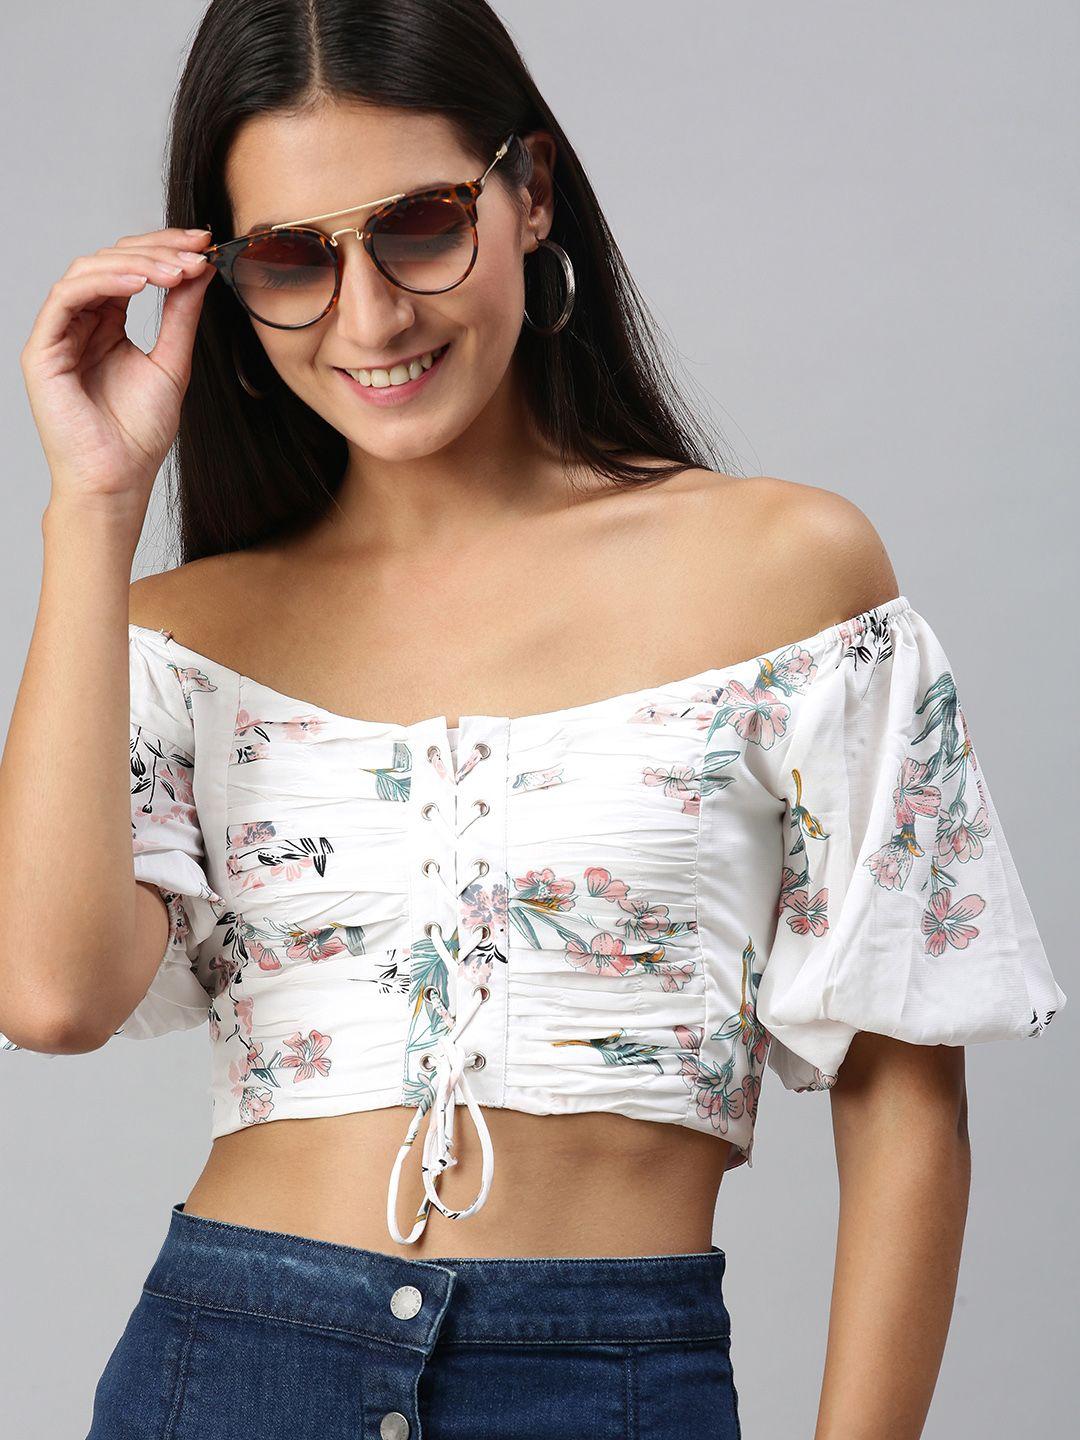 kassually serene white and green floral print ruched crop top